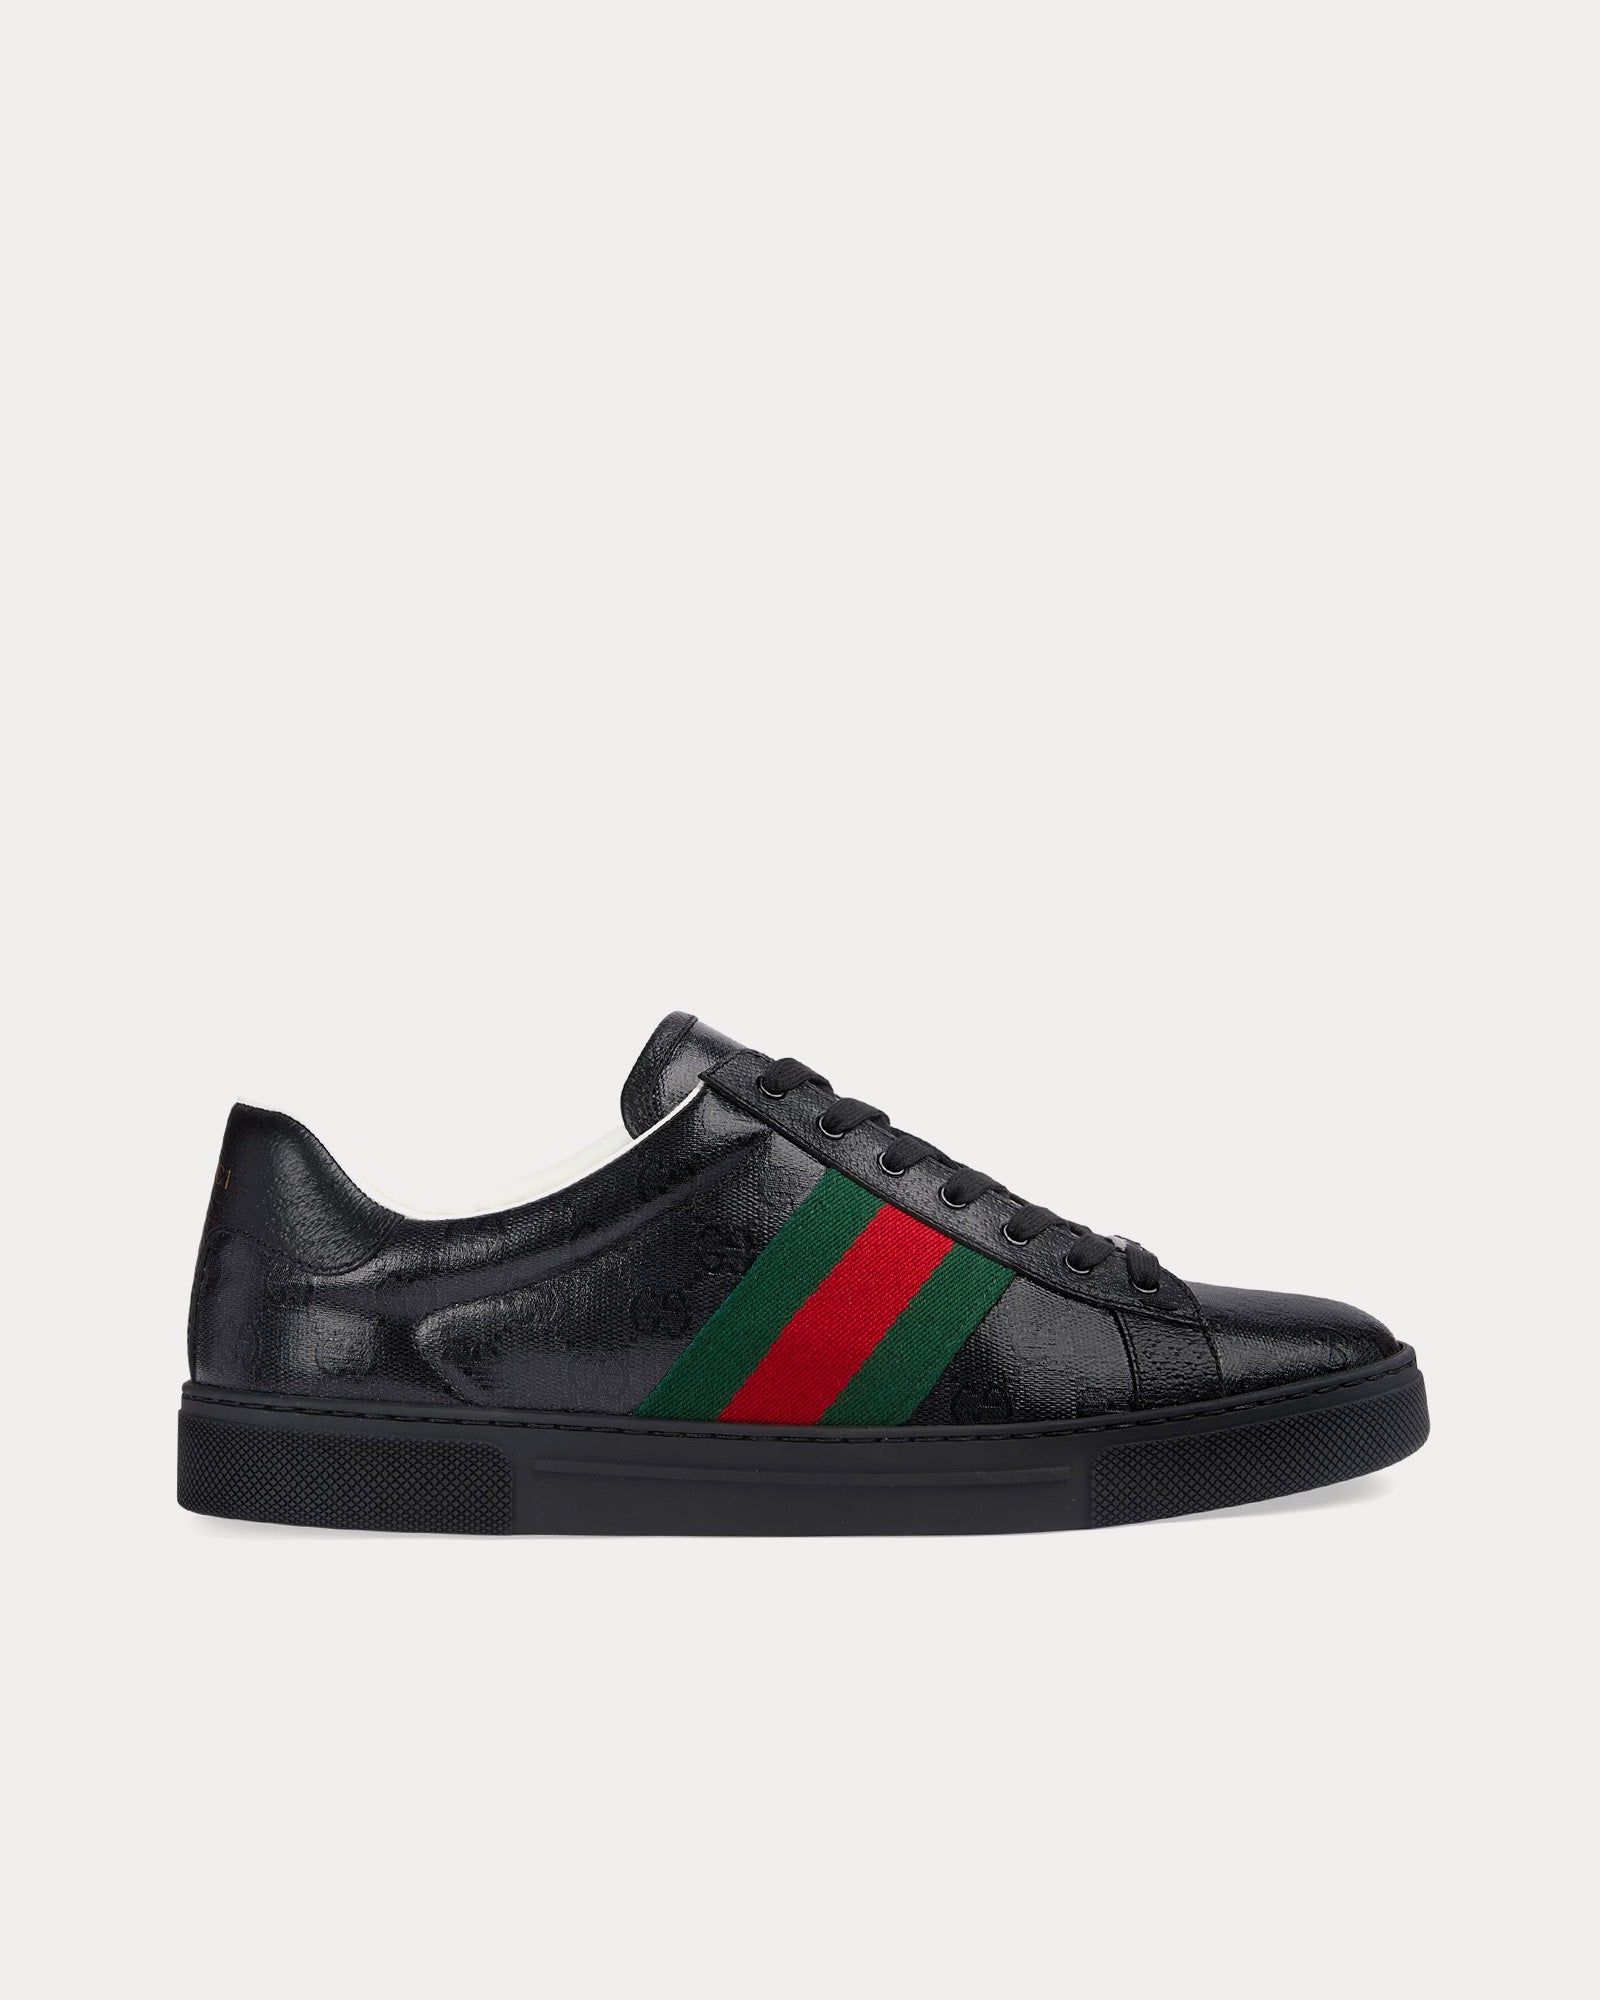 Gucci Ace GG Crystal Canvas Black Low Top Sneakers - Sneak in Peace